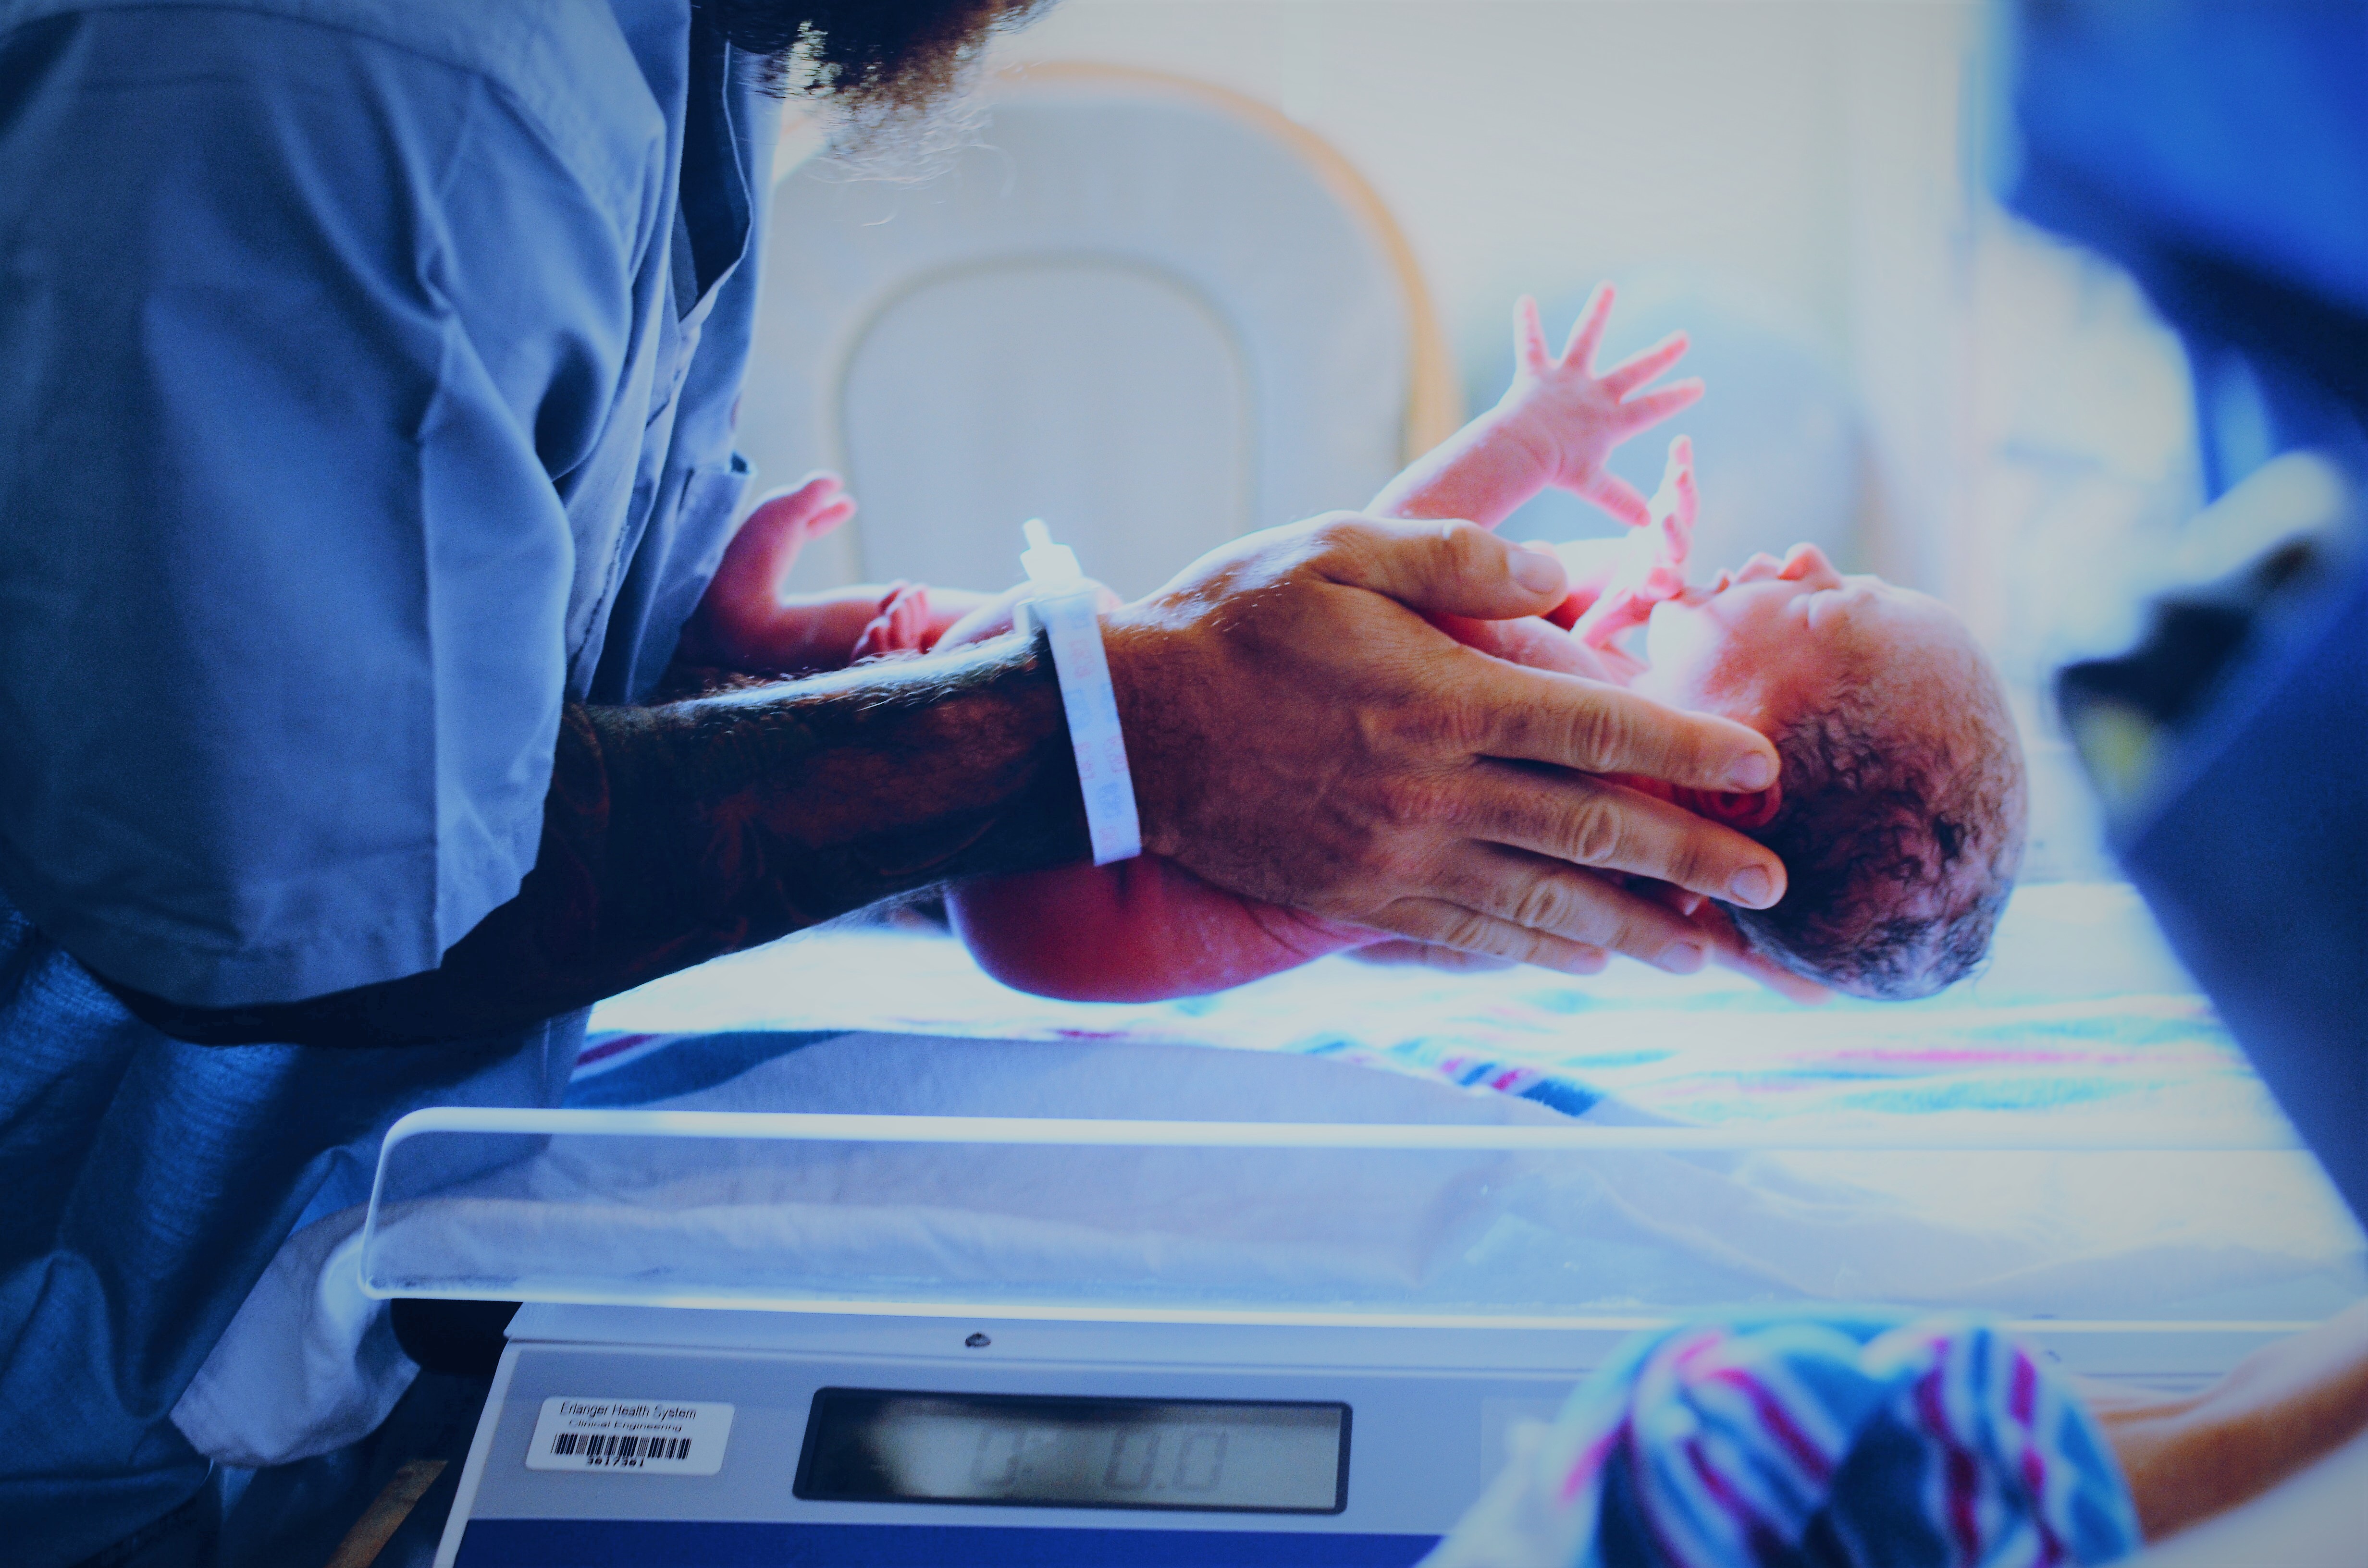 Newborn baby help by person in a hospital gown being weighed on a scale